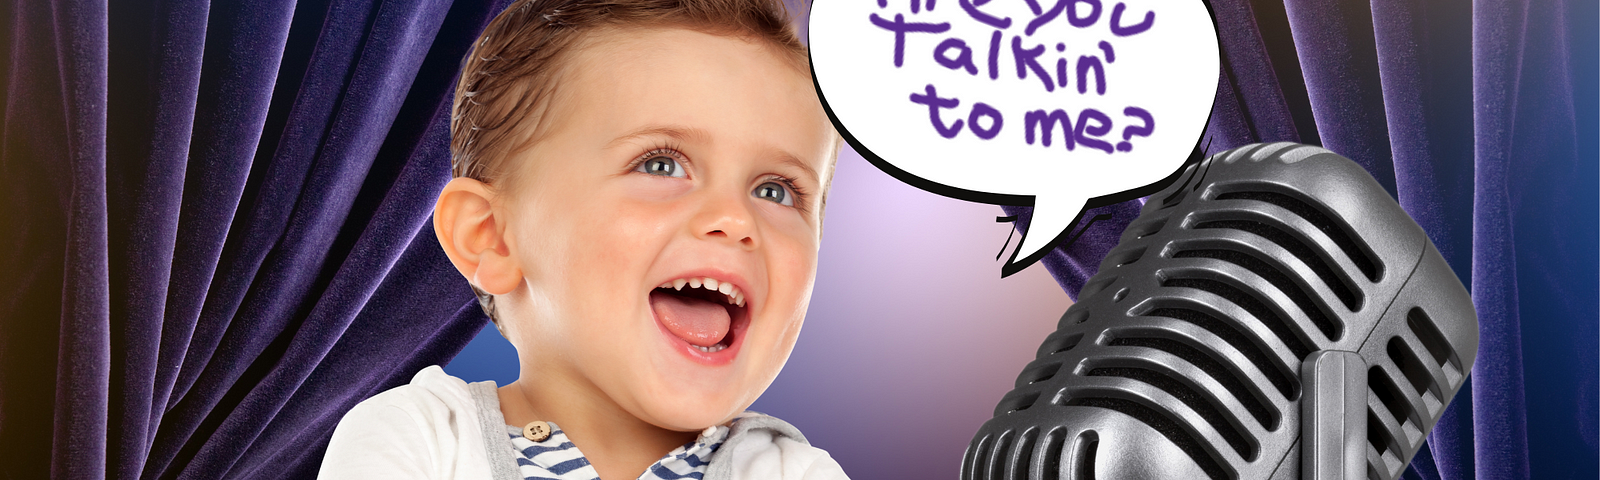 This is a digitally altered or stylized image featuring a young child with a delighted expression looking towards a vintage microphone. The child is smiling broadly and is wearing a white T-shirt with navy blue stripes at the neckline. There’s a speech bubble coming from the child with the text “Are you talkin’ to me?” The background has a theatrical look with deep purple curtains, giving the impression that the child is on stage or part of a performance.